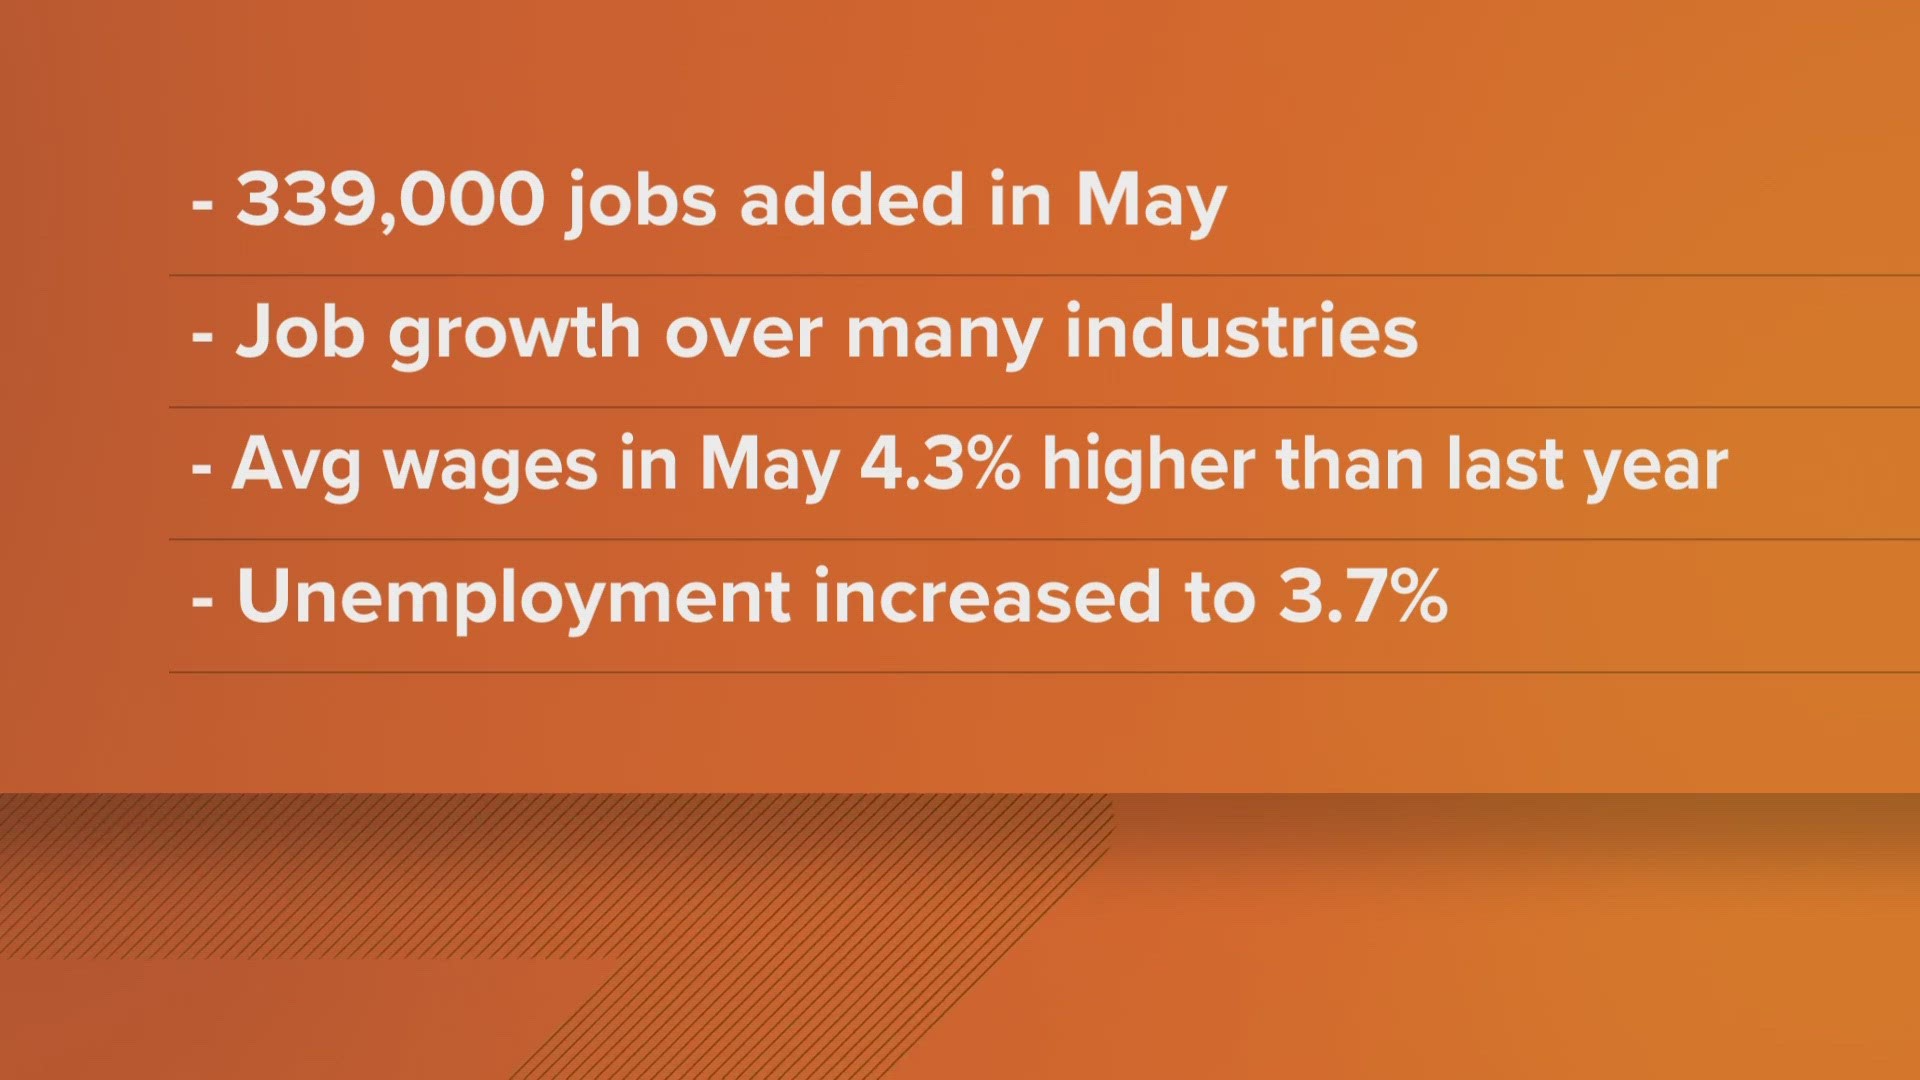 Whitney Traylor breaks down the data from Colorado's May jobs report, and shares some employment opportunities for Coloradans looking for work.